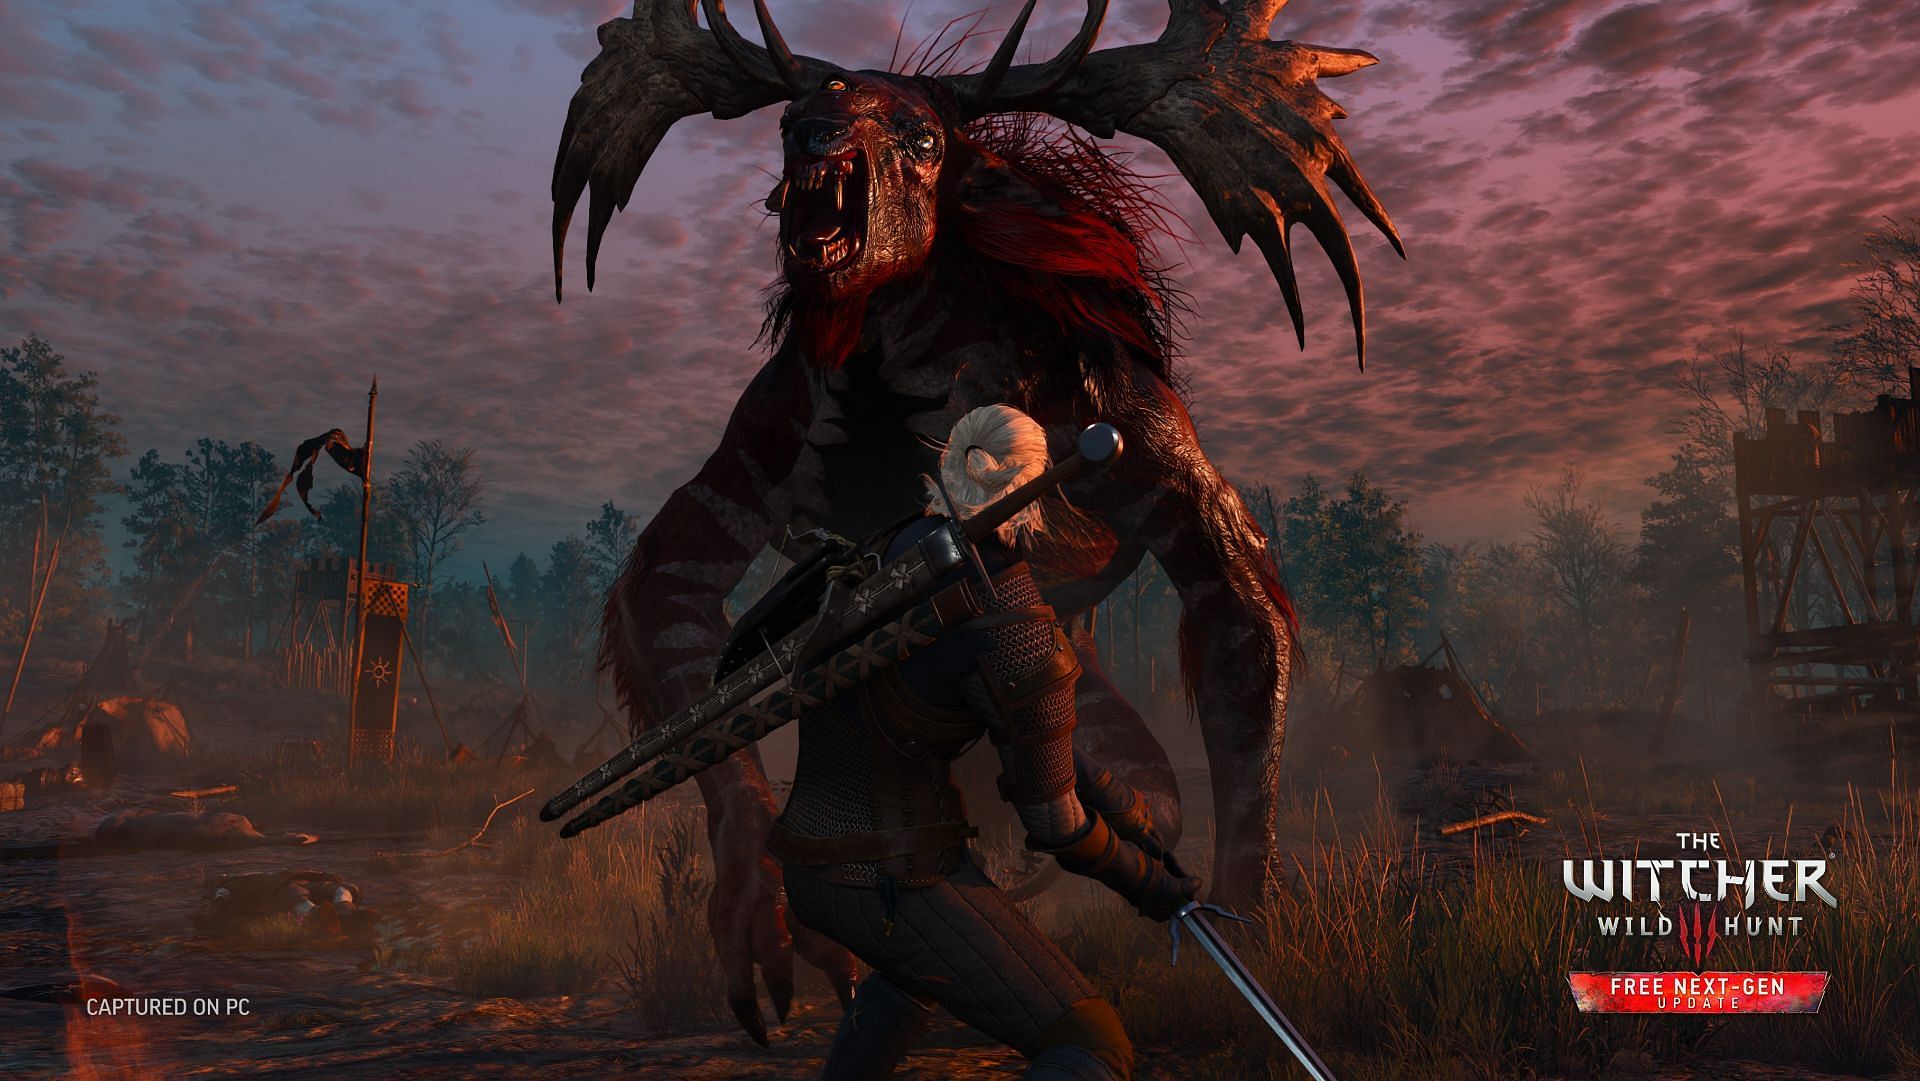 Witcher 2 is free, but would it be fun after playing Witcher 3?